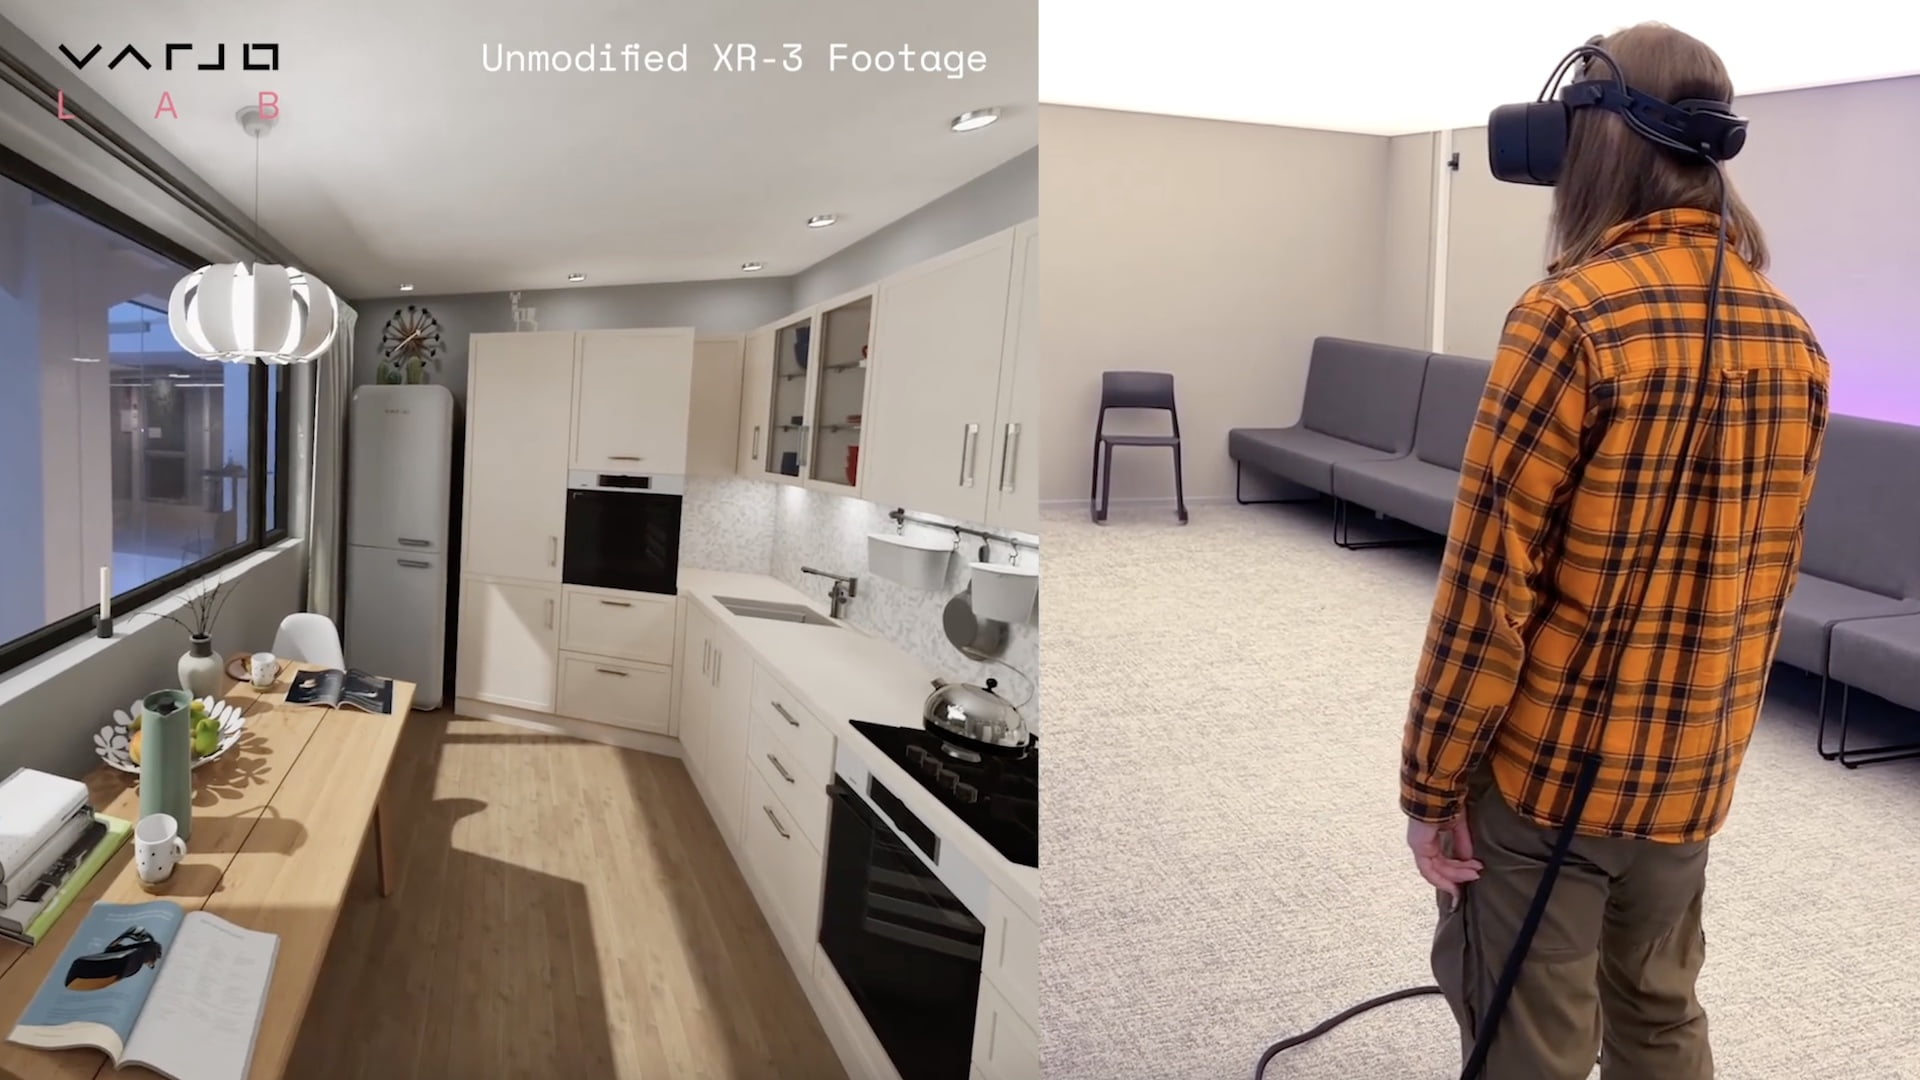 Impressive demo: Mixed Reality puts a virtual kitchen in real space